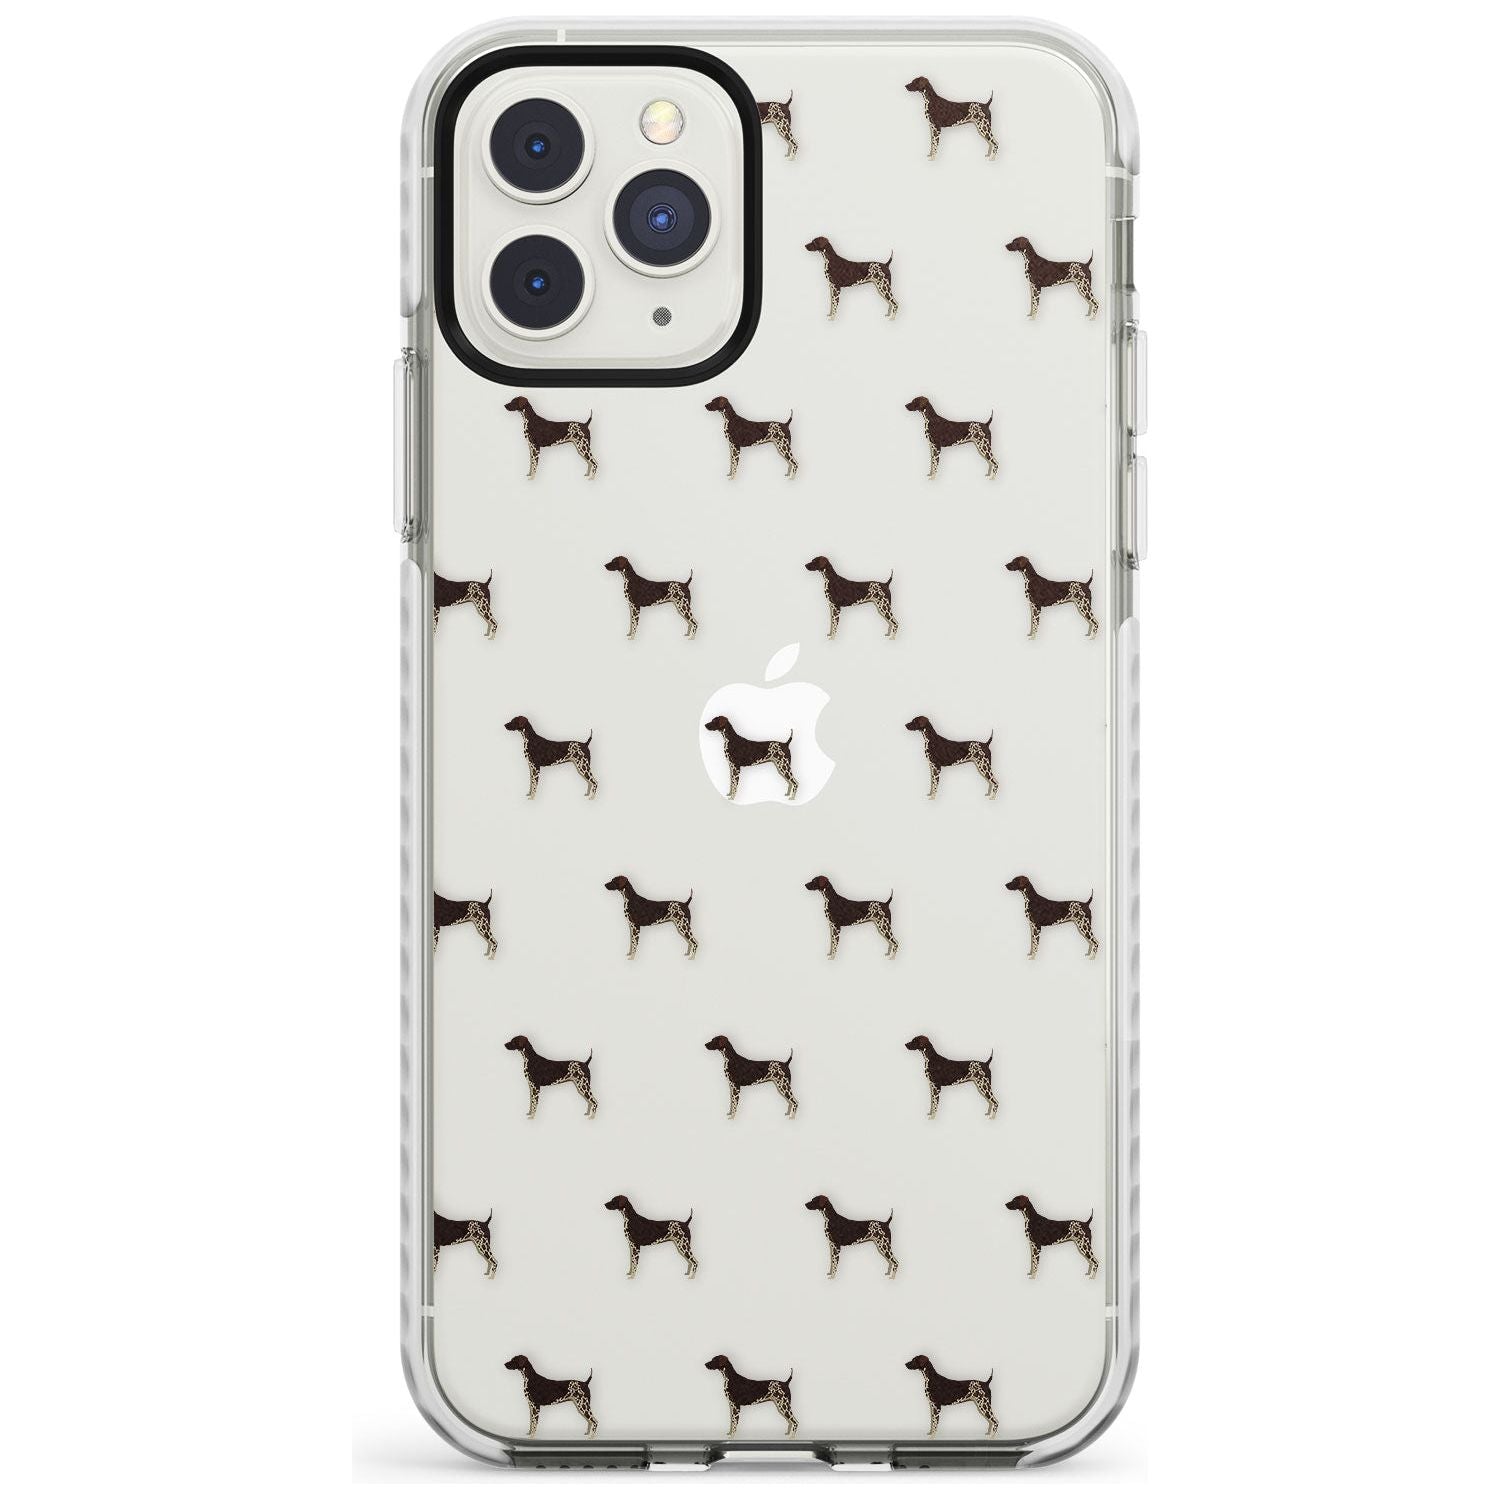 German Shorthaired Pointer Dog Pattern Clear Impact Phone Case for iPhone 11 Pro Max